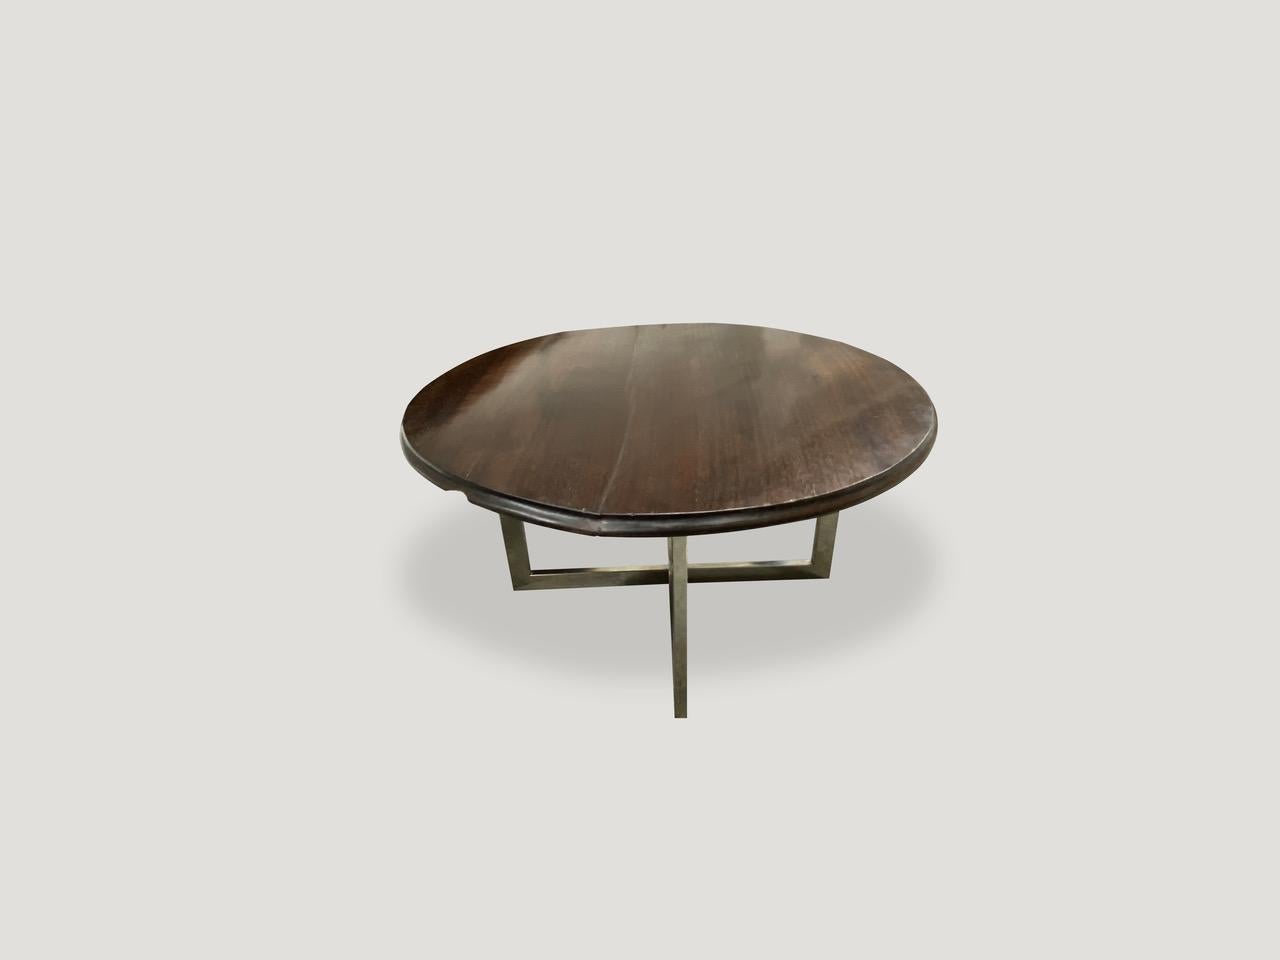 Impressive single slab Ulin wood coffee table from Kalimantan. Stunning patina with a hand carved beveled edge on this 1